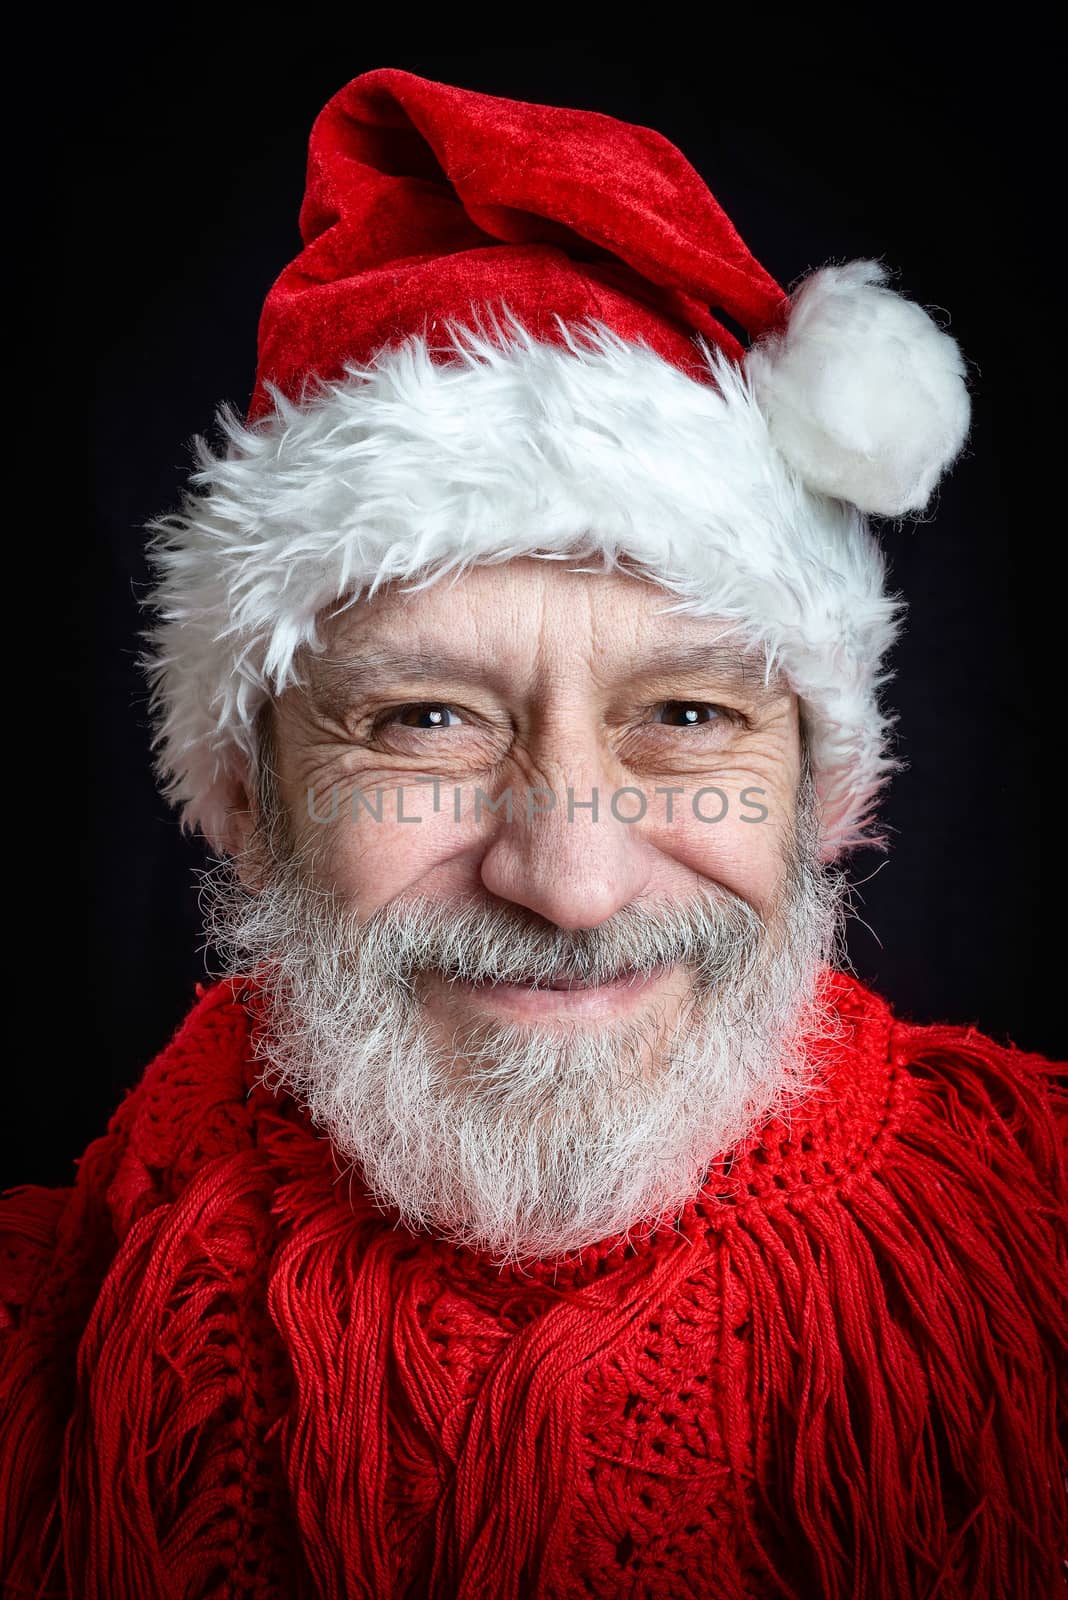 Portrait of an adult man with white beard disguised in Santa Claus for the Christmas Holiday